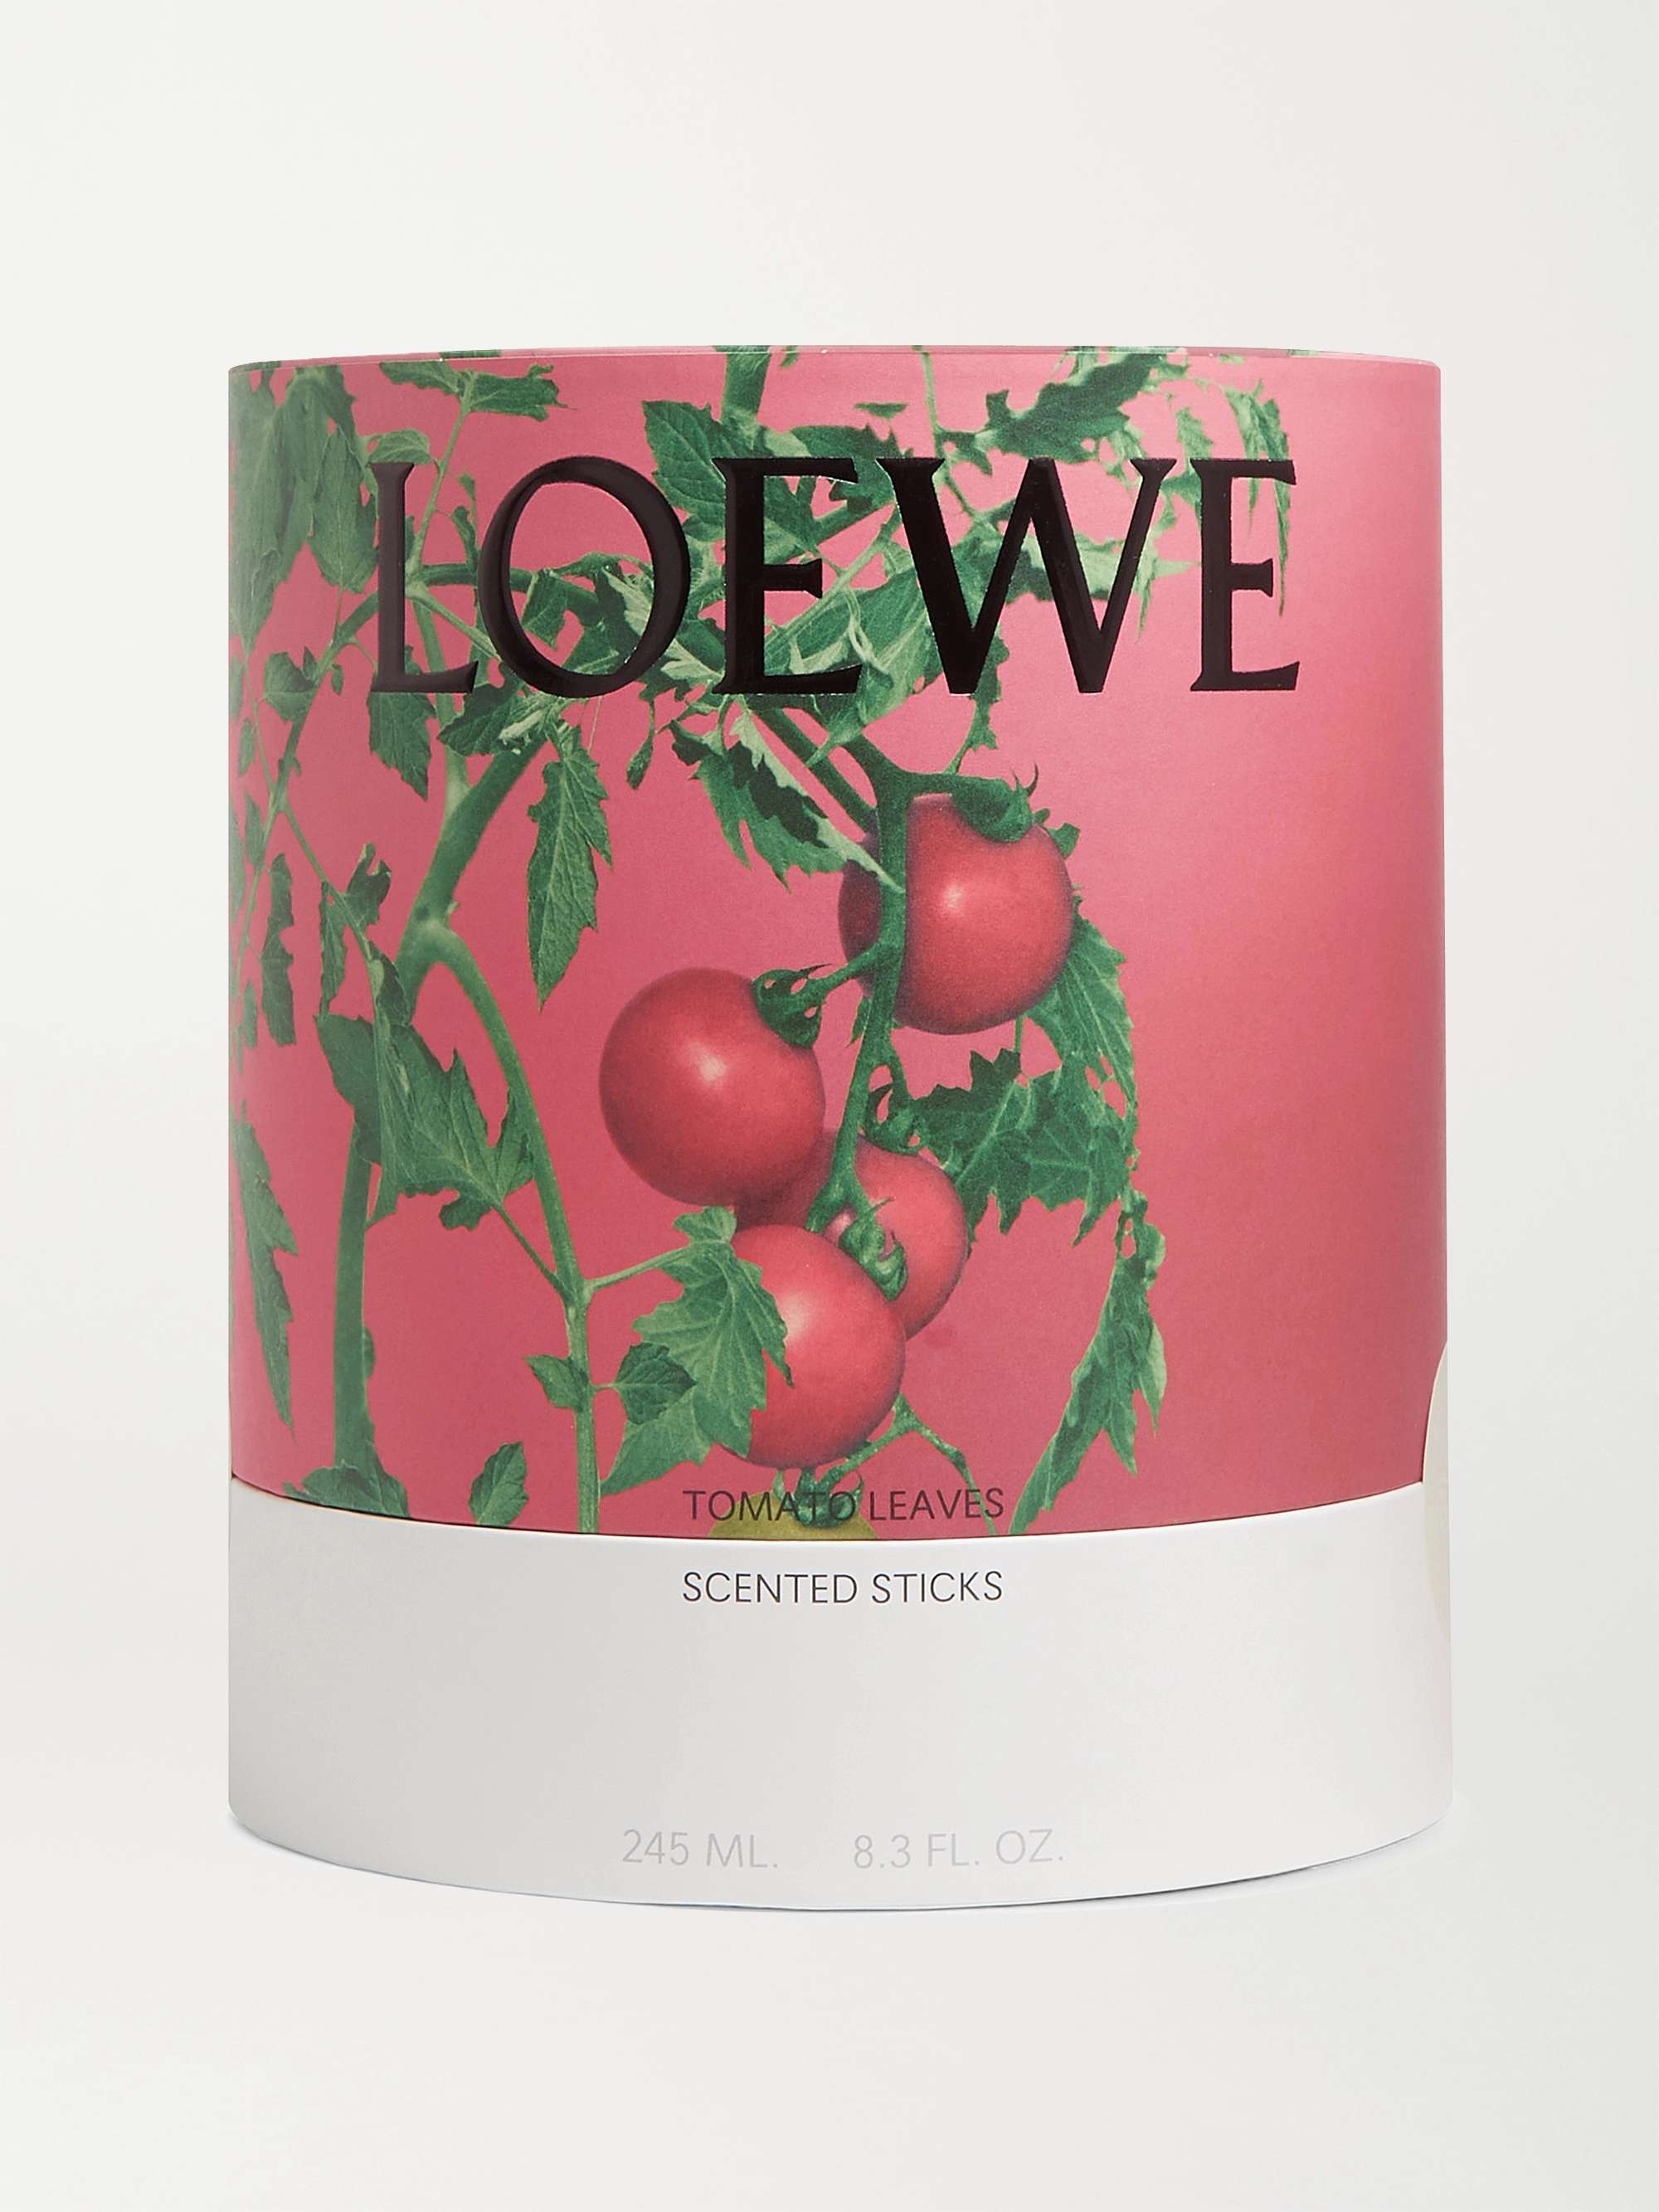 LOEWE HOME SCENTS Tomato Leaves Scent Diffuser, 245ml